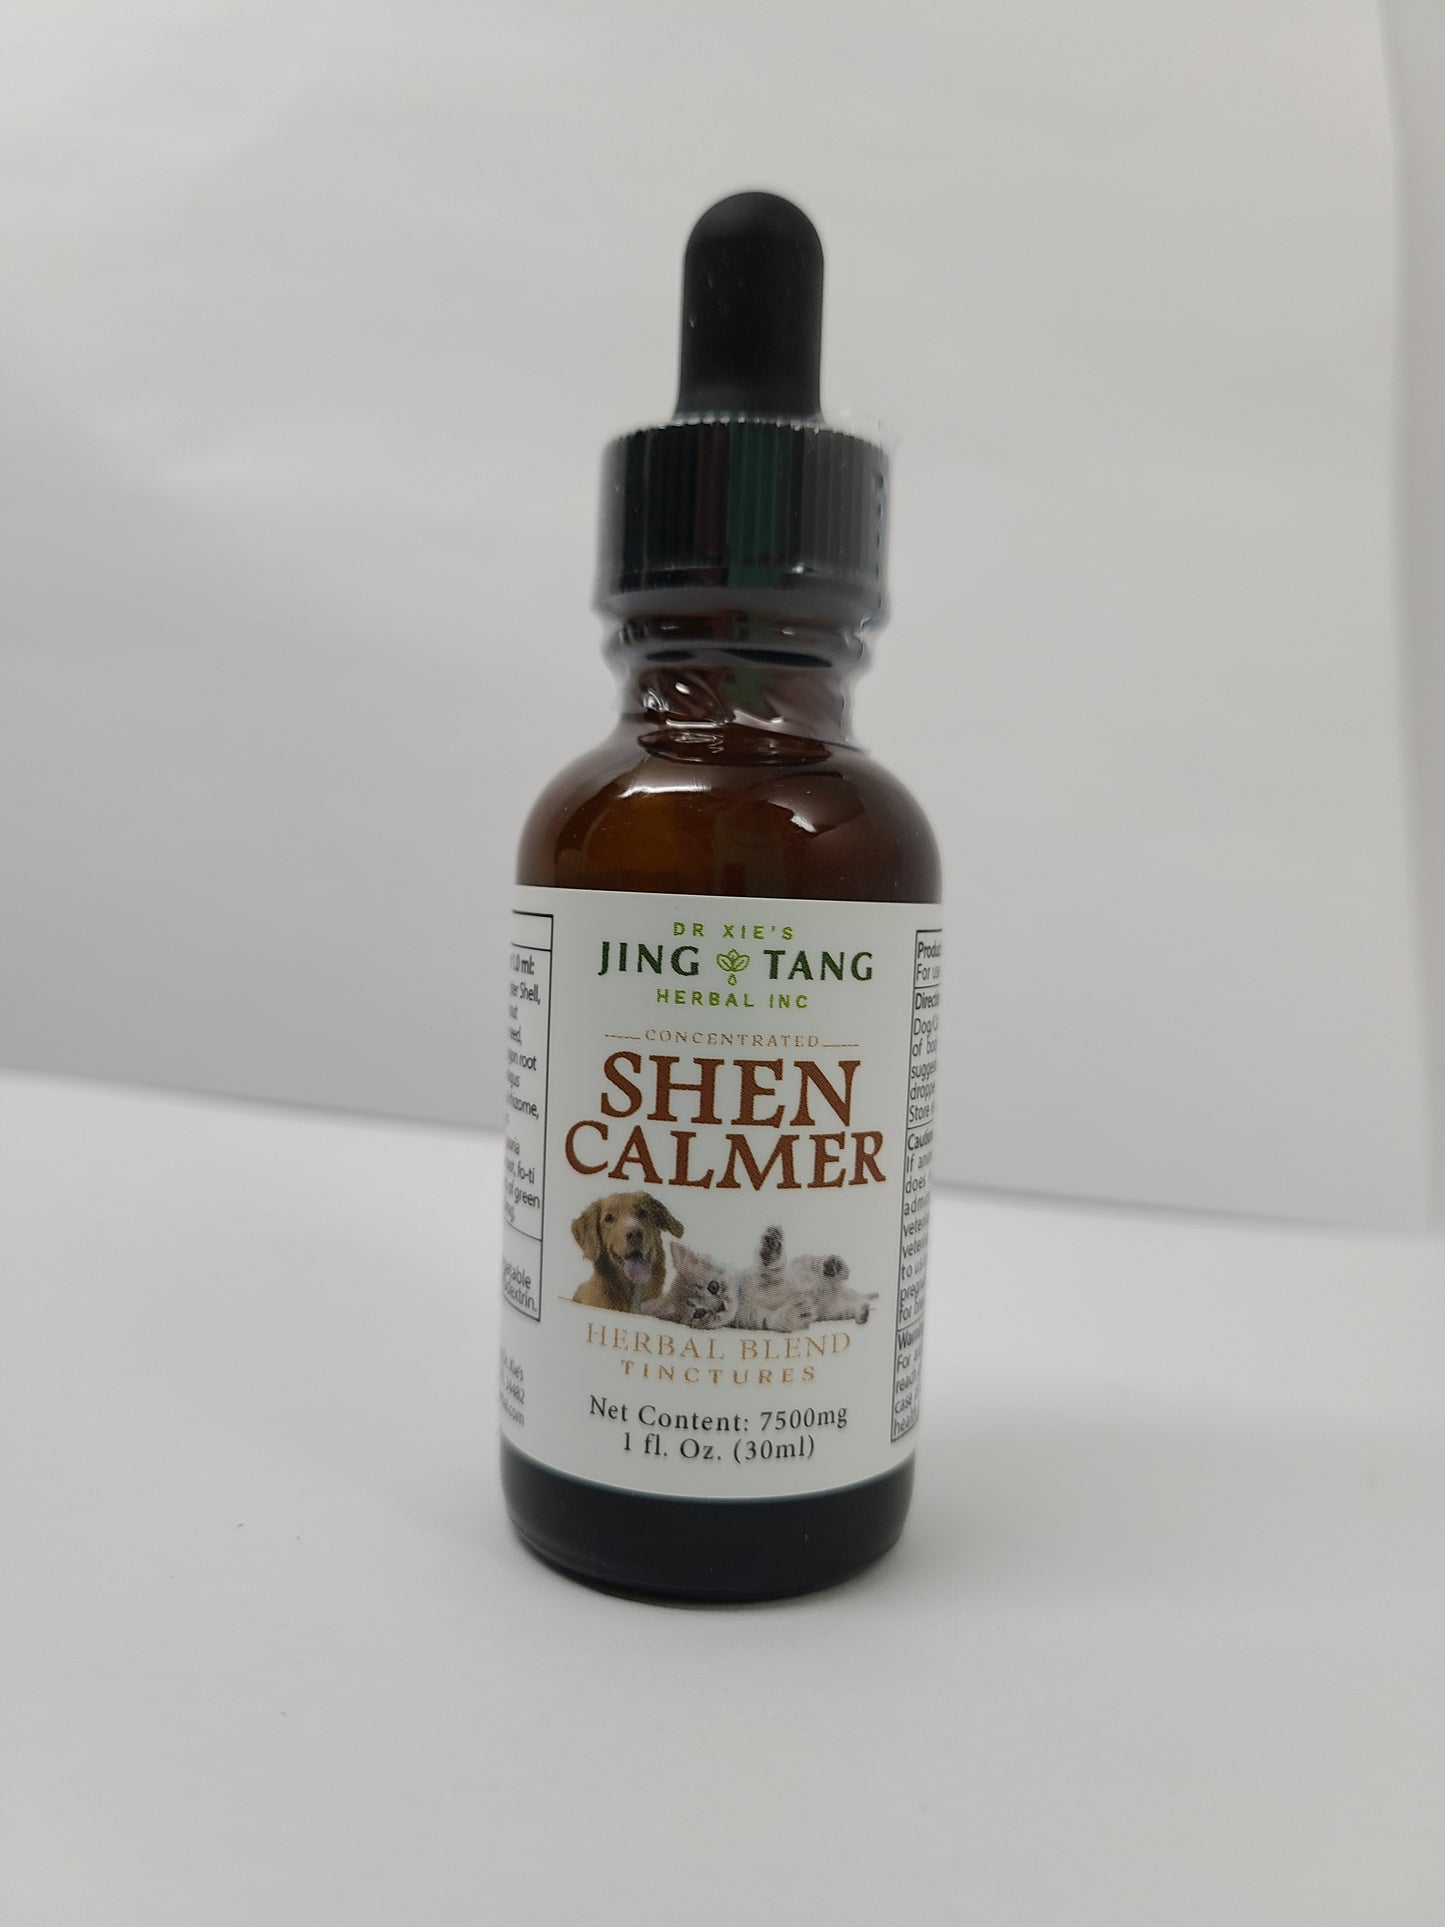 Jing Tang Herbals: Concentrated Shen Calmer 7500mg Whitefish Tincture (1 bottle)